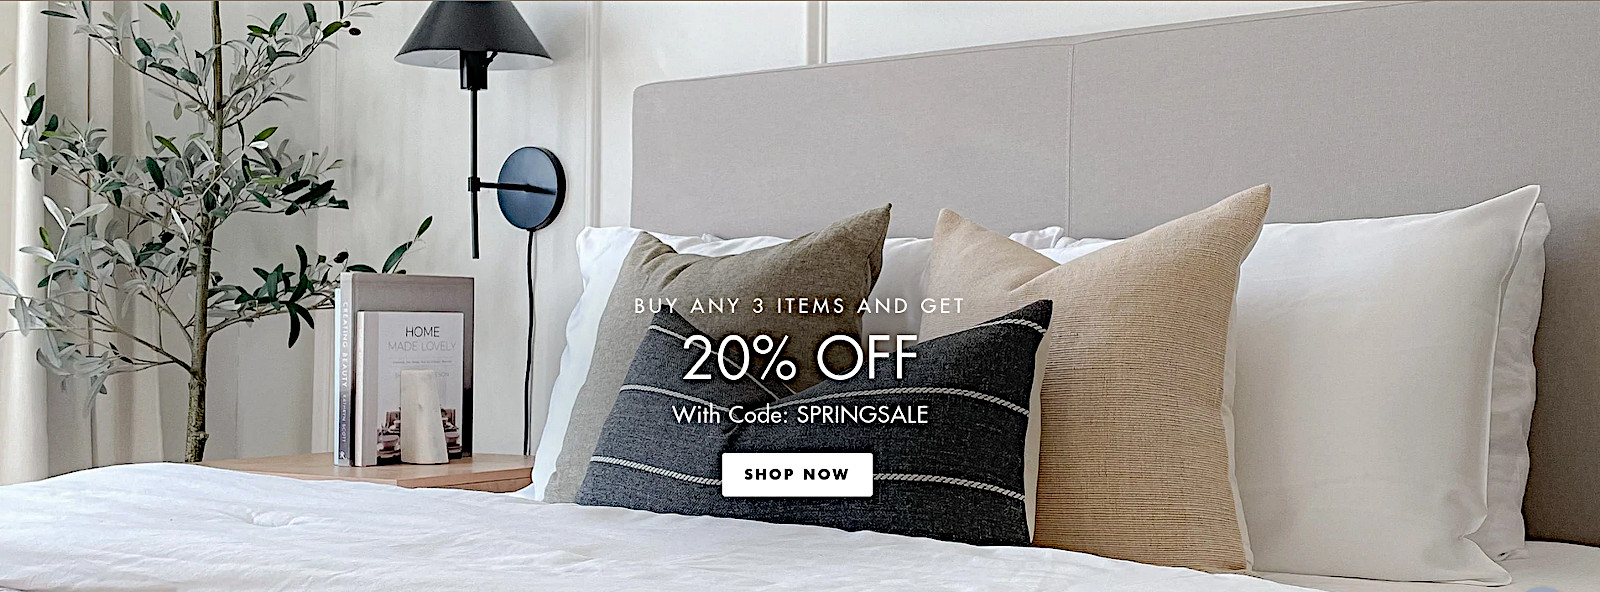 bamboo bedding discount rate